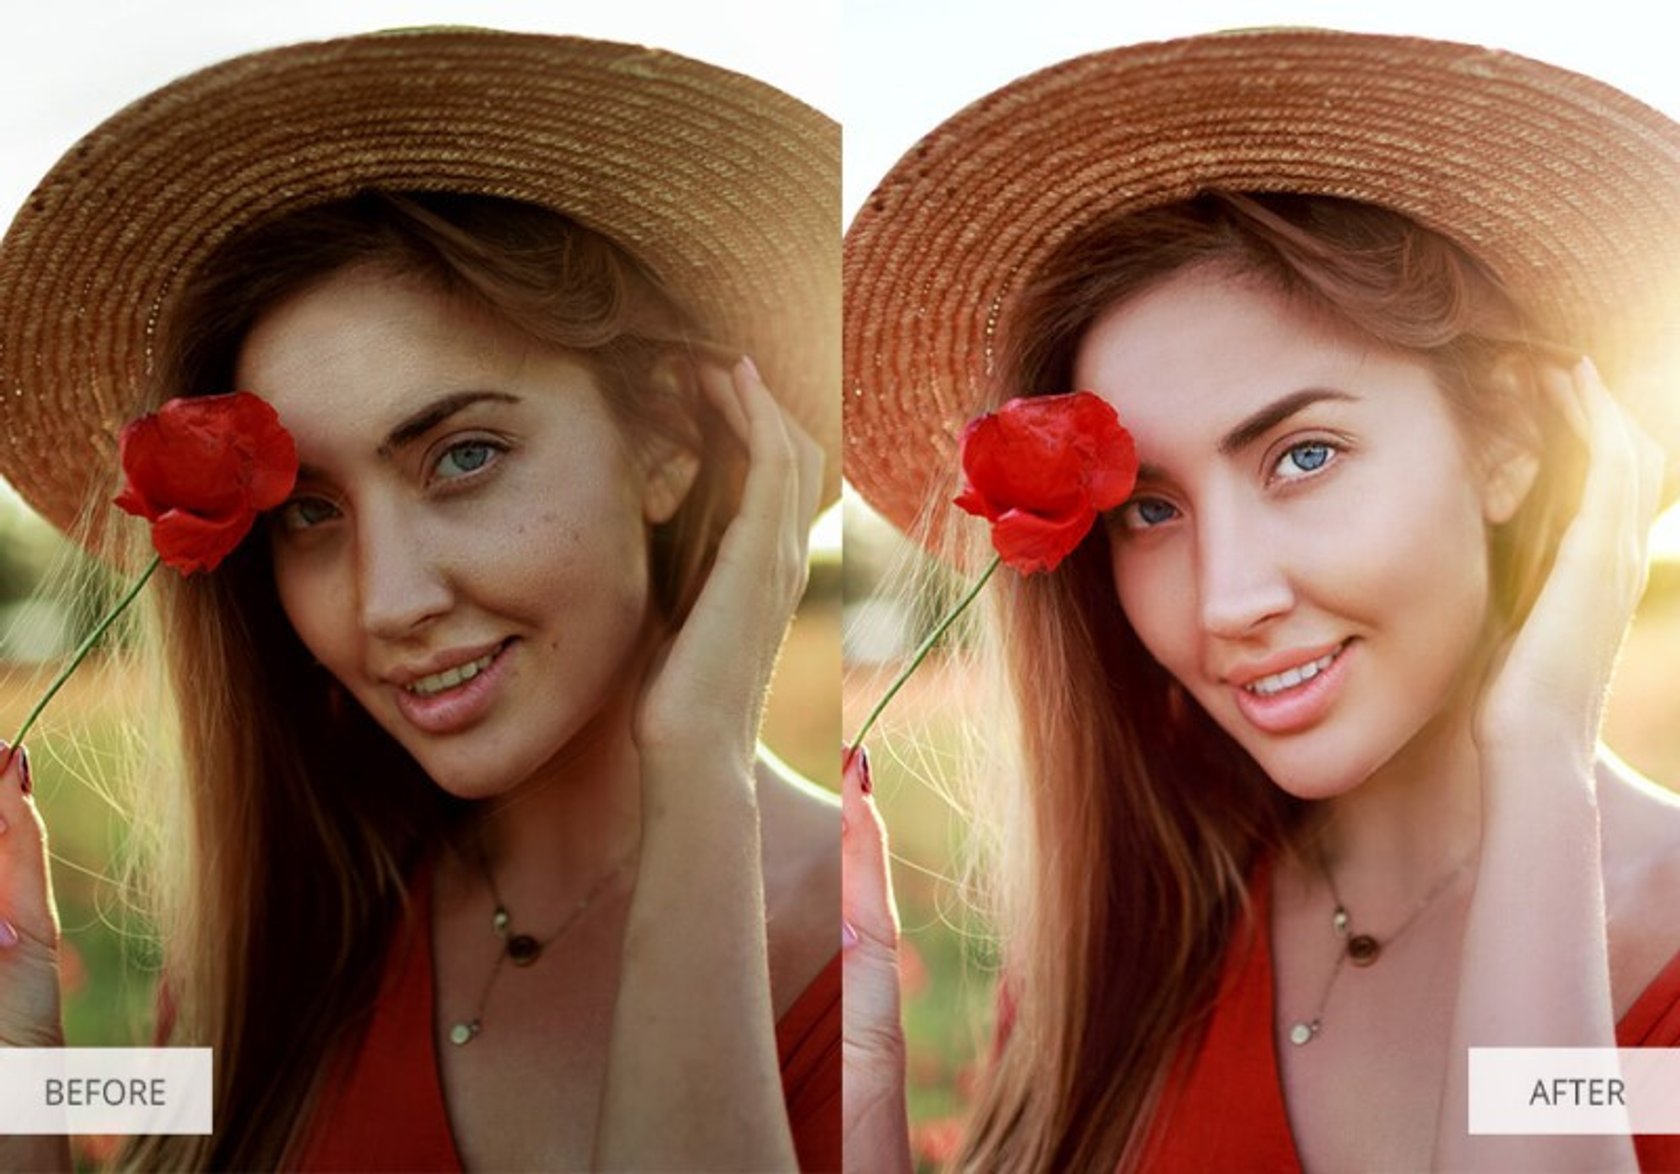 amazing photoshop effects before and after